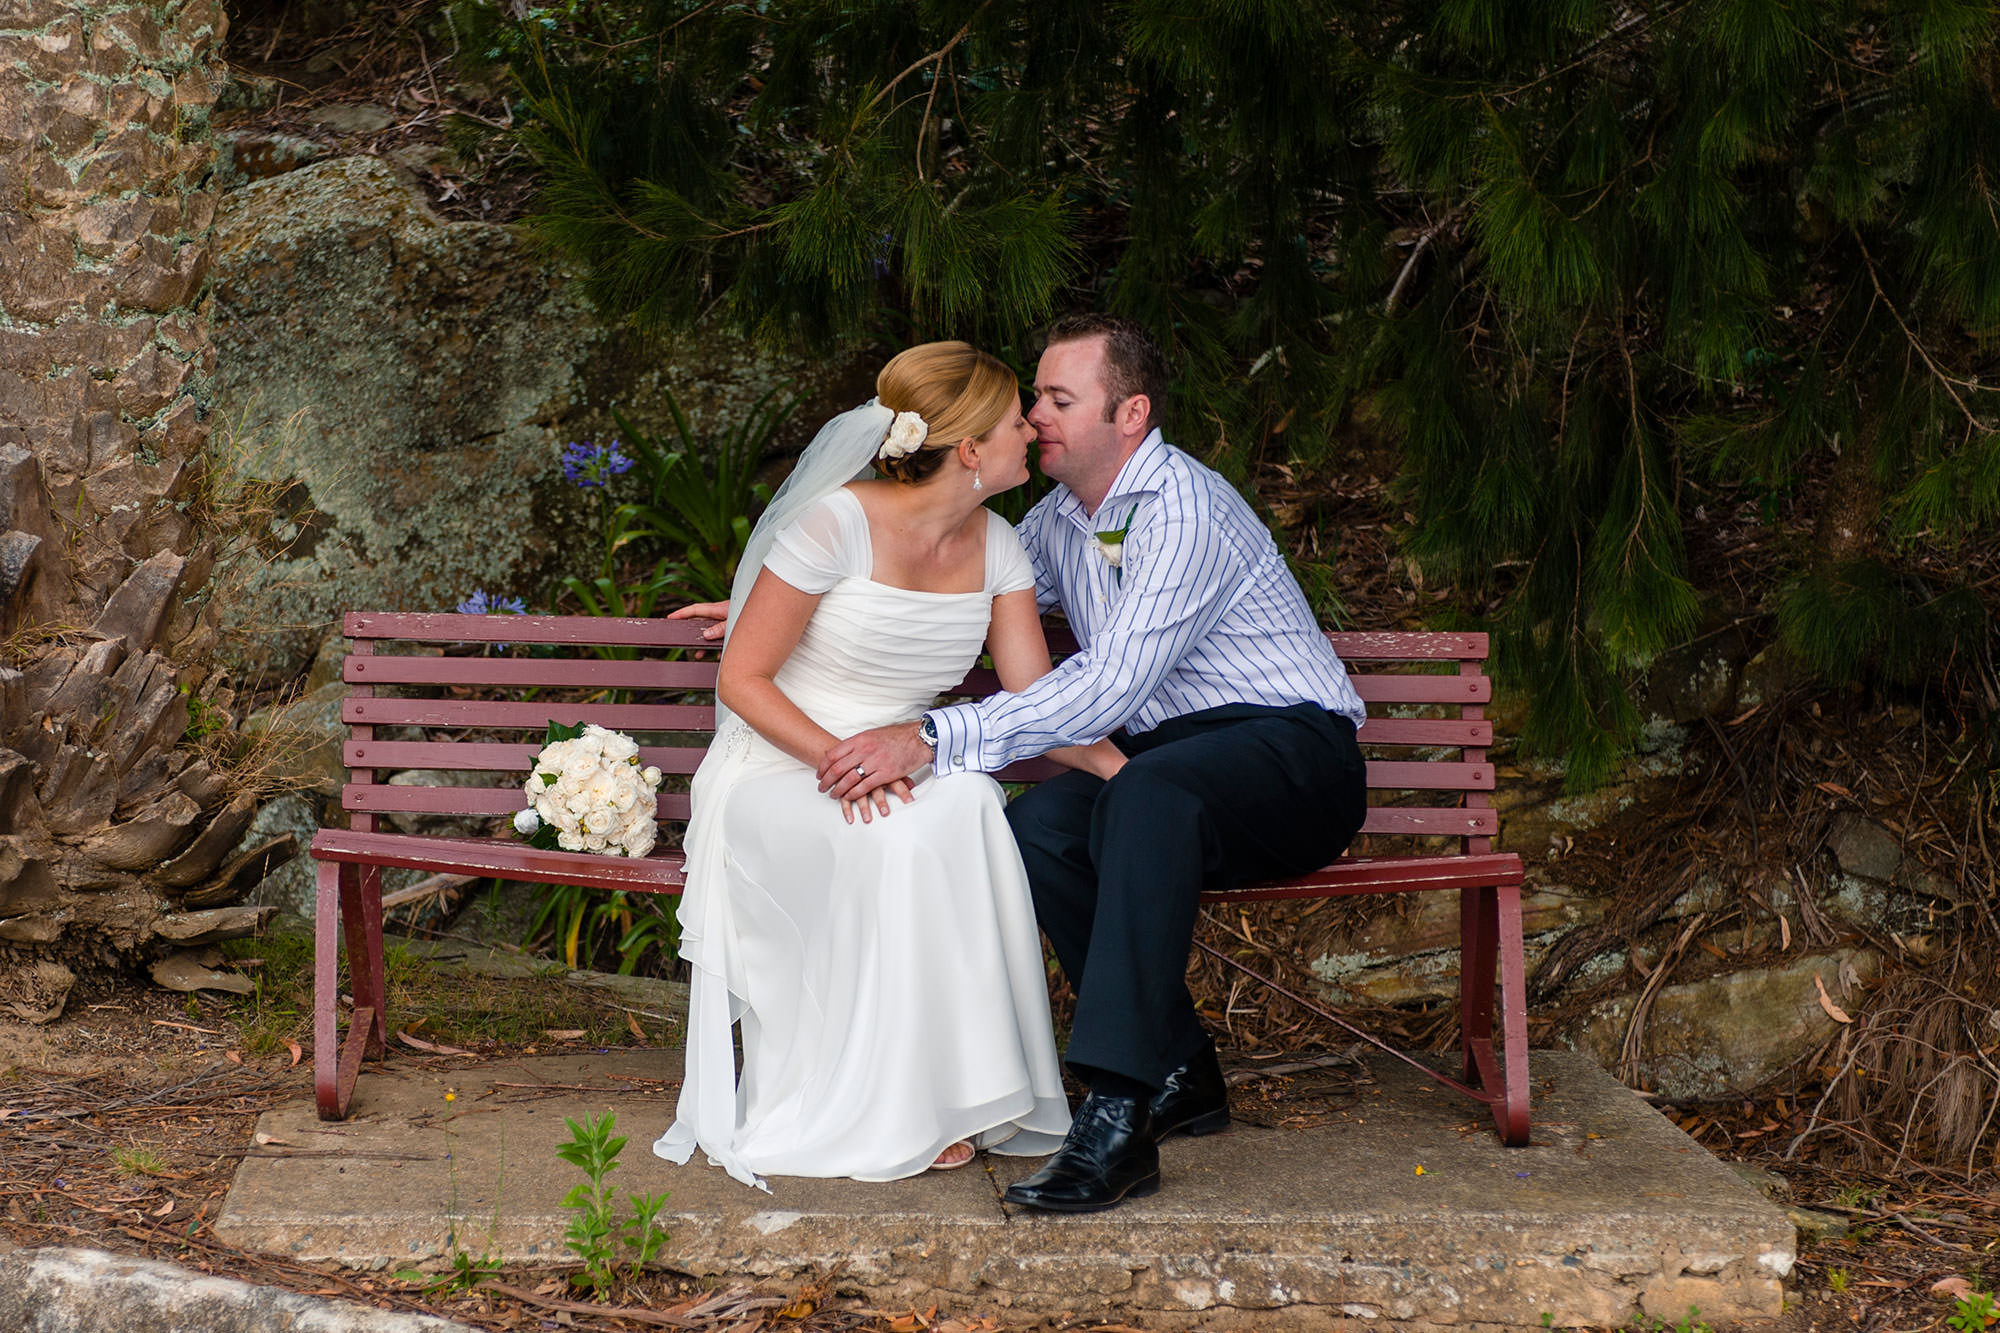 Quiet moment for bride and groom on bench